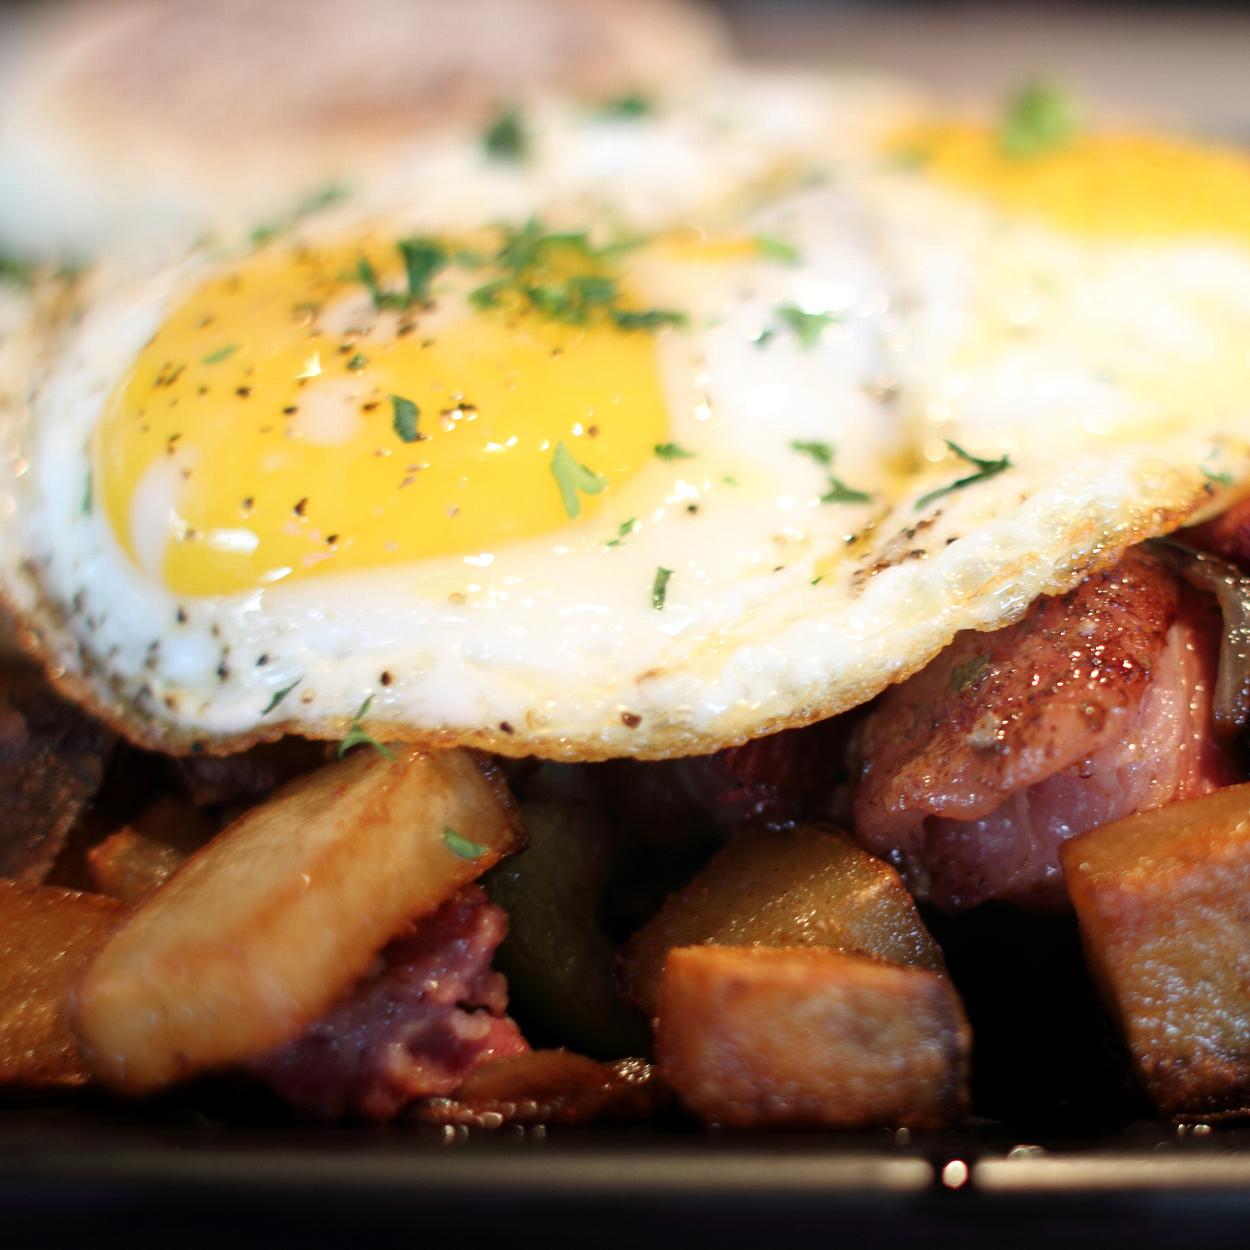 Fried egg and breakfast hash